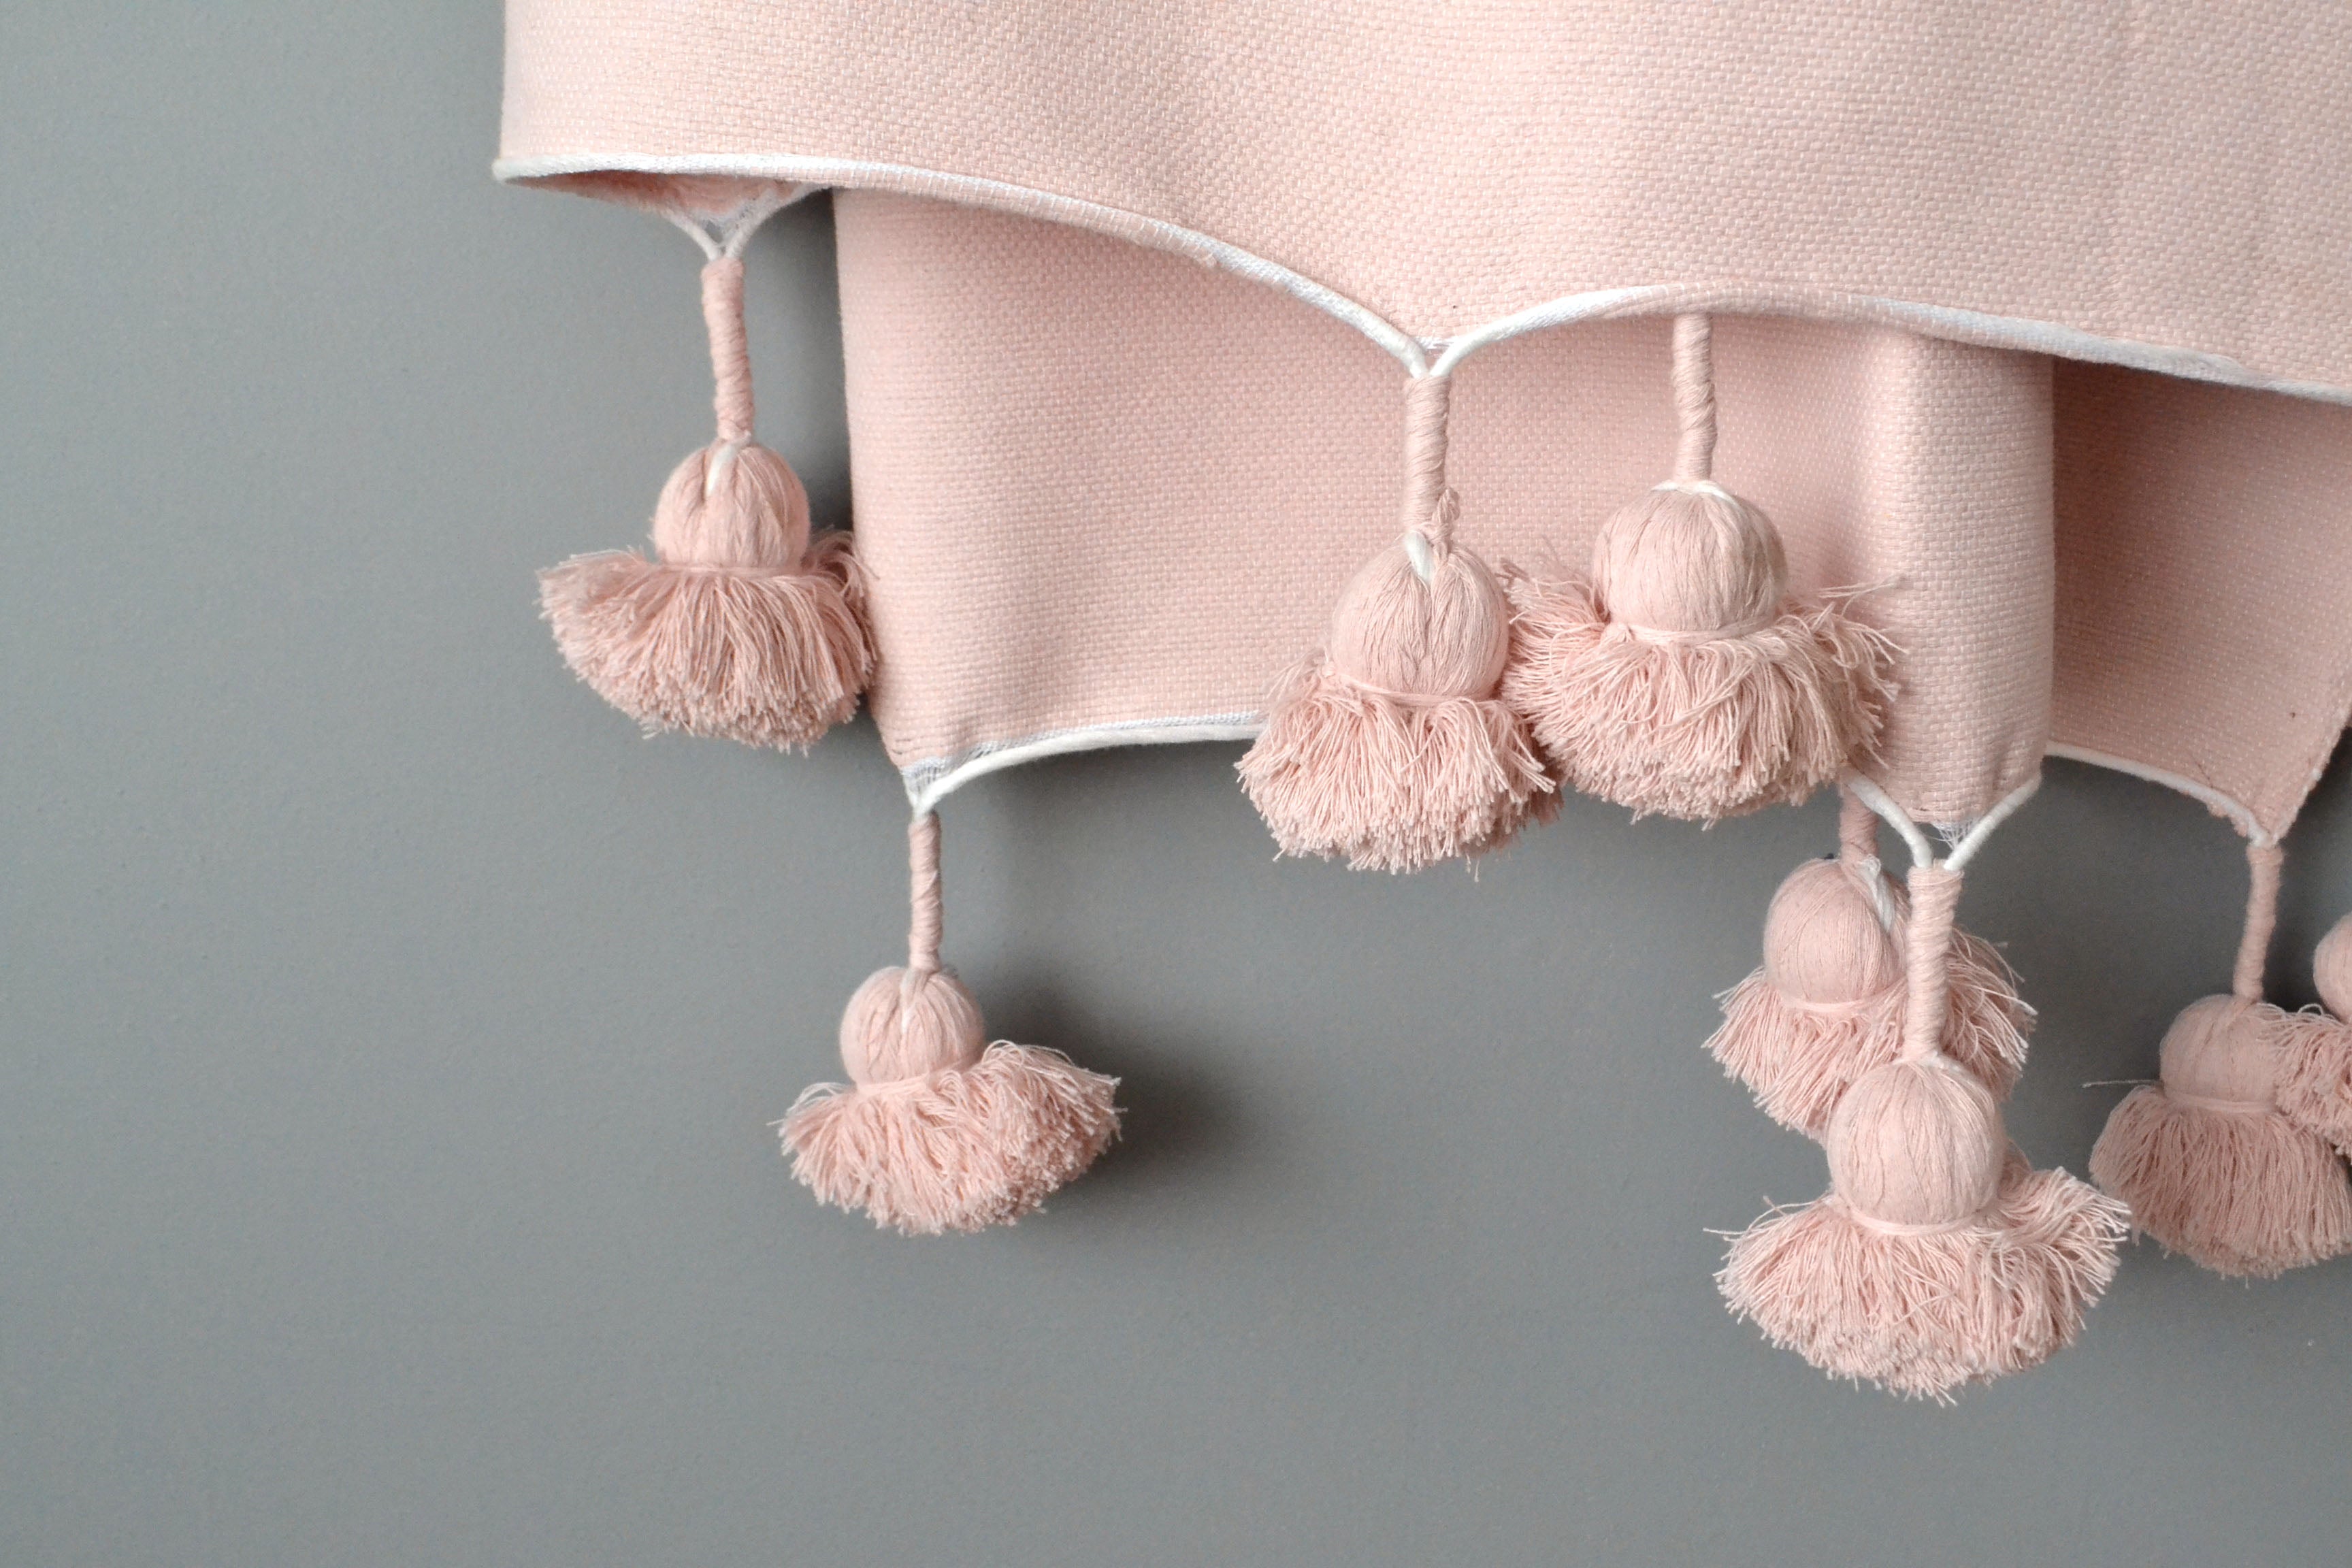 Dusty Pink Cotton Pom Pom Throw from Yuba Mercantile